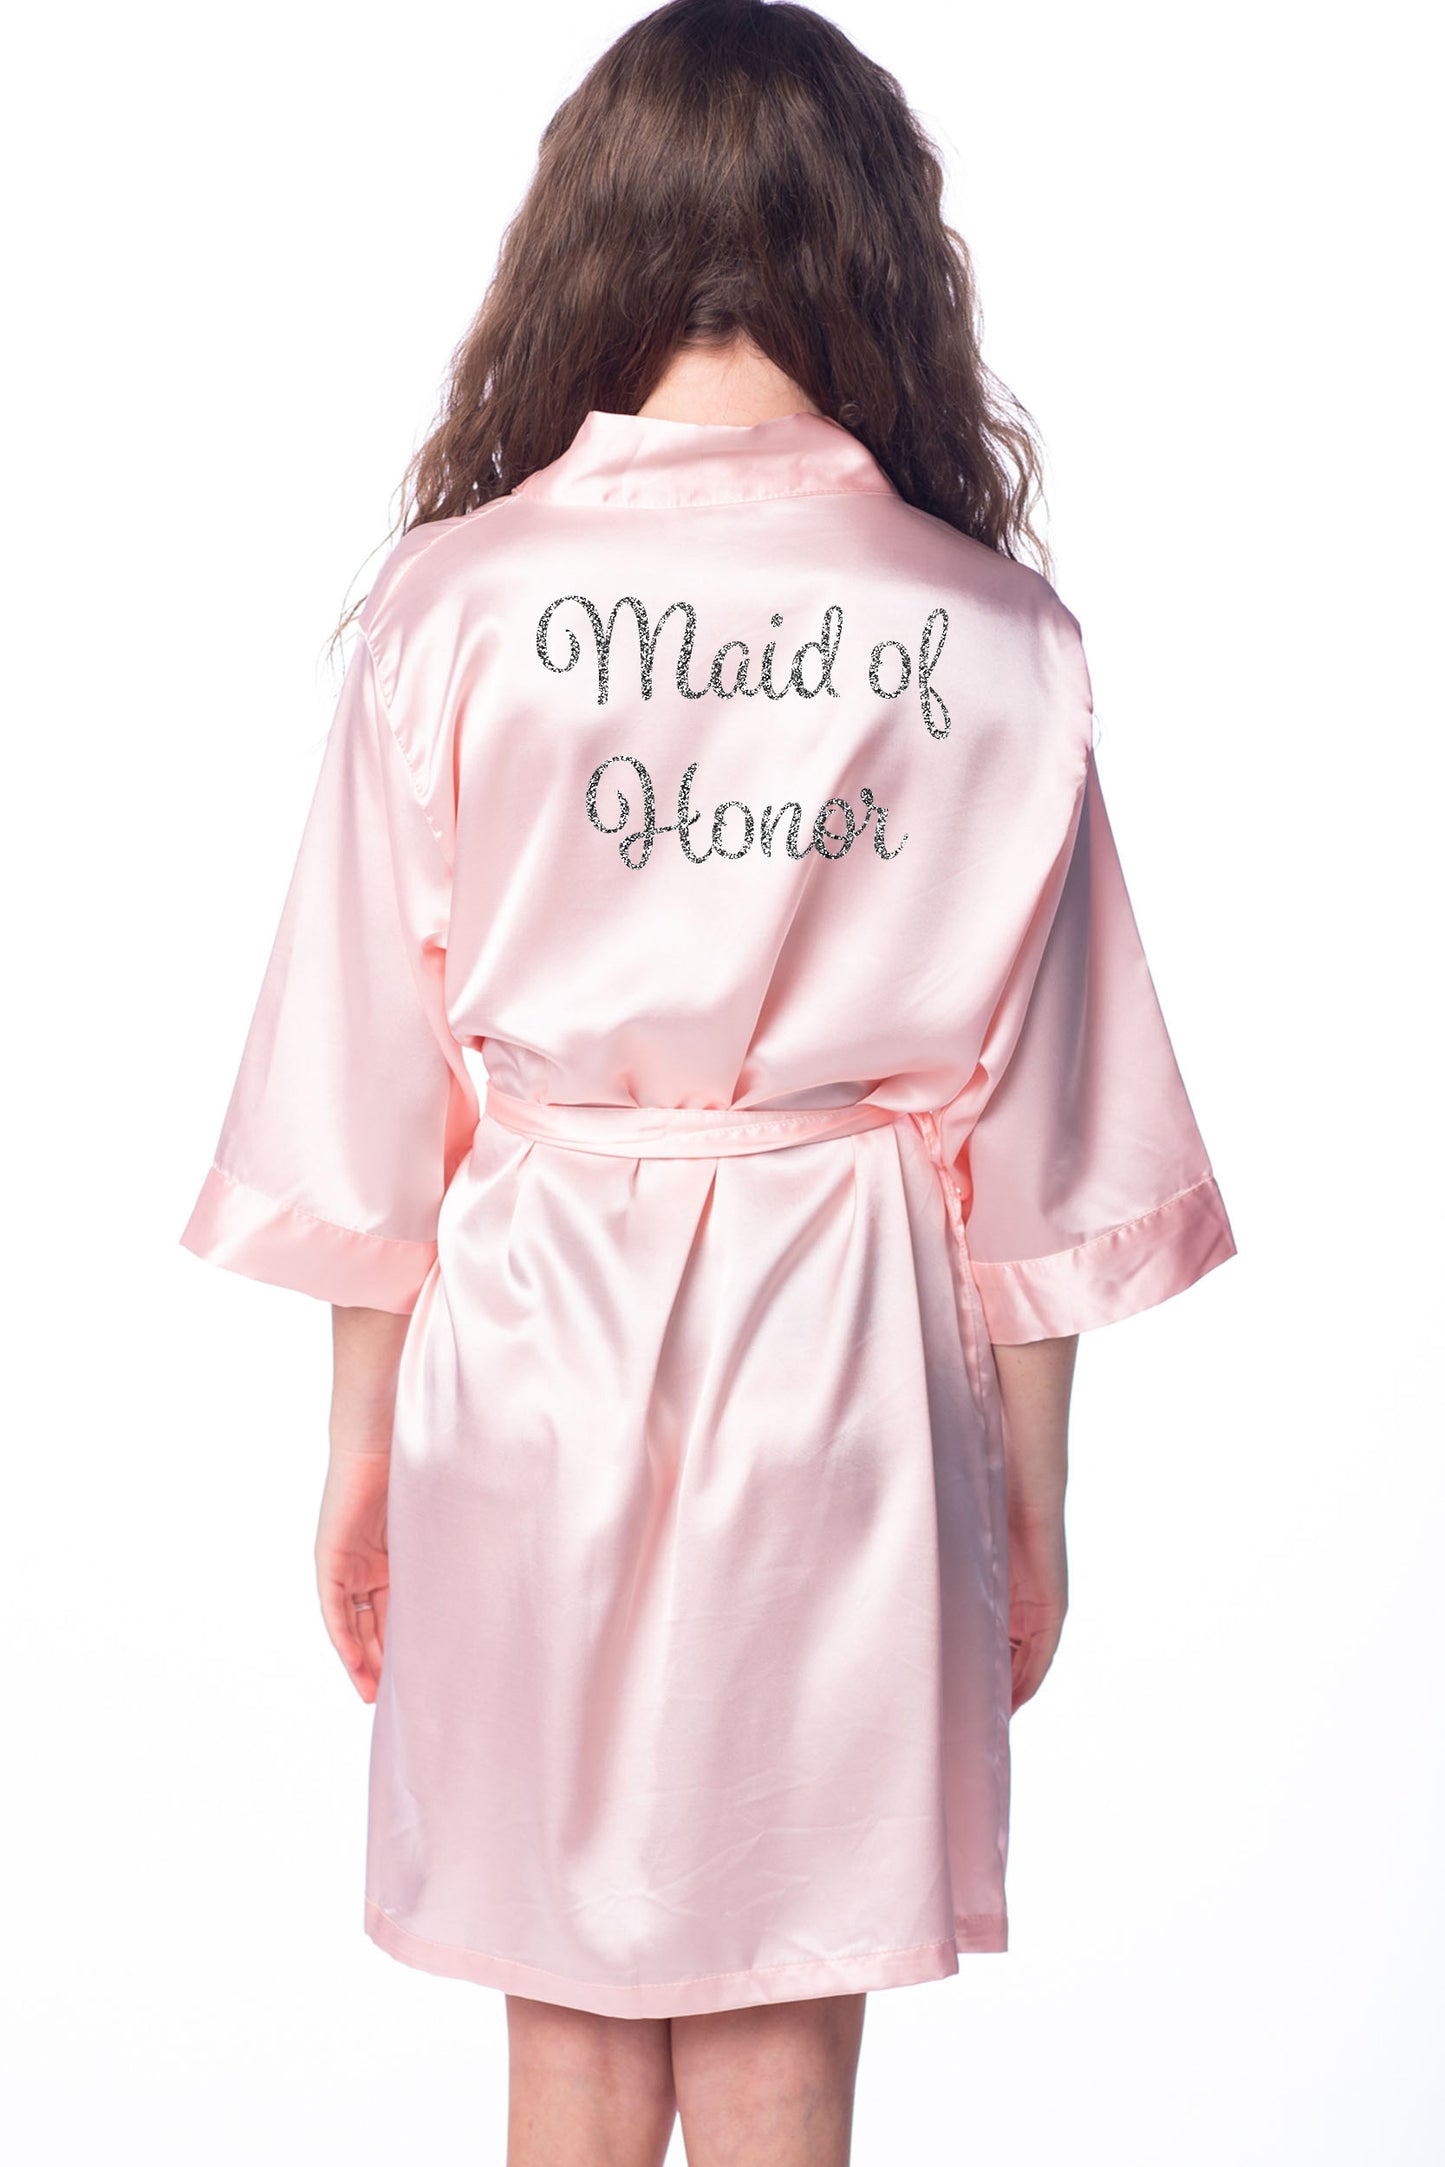 L/XL "Maid of Honor" Peach Satin Robe - Spumante in Silver Glitter (Clearance Item)